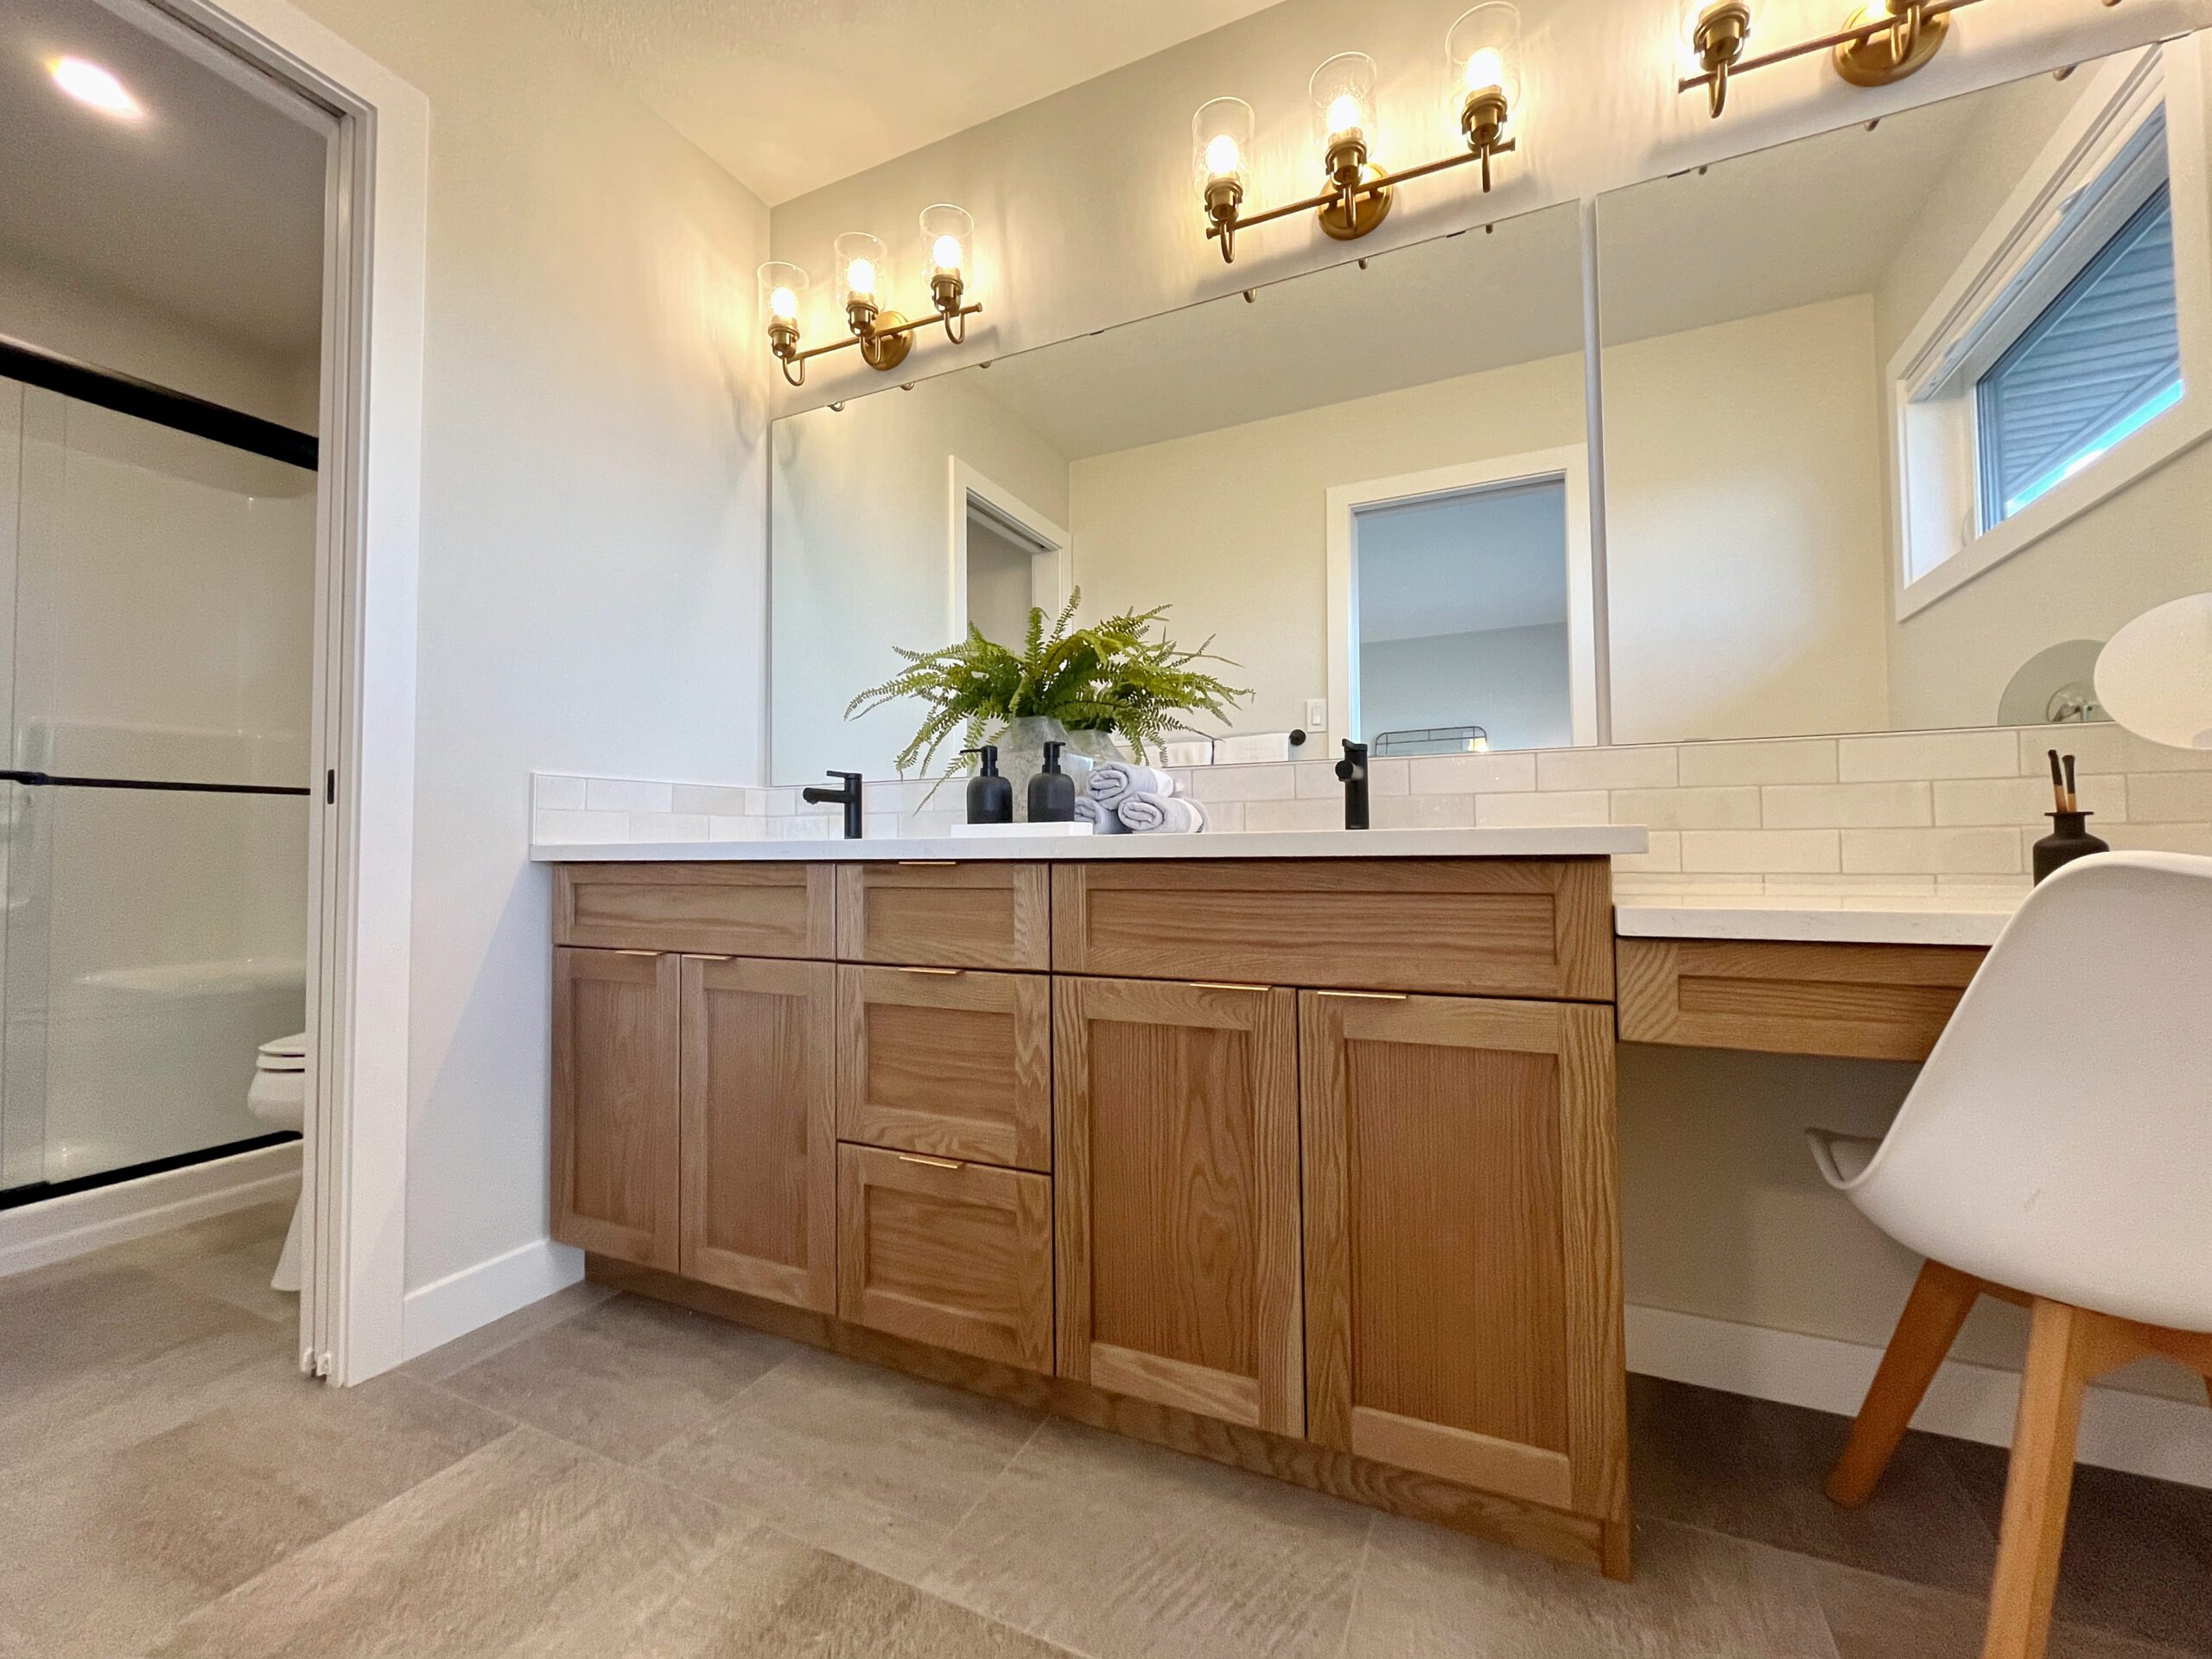 A white bathroom with wooden cabinets and a mirror.